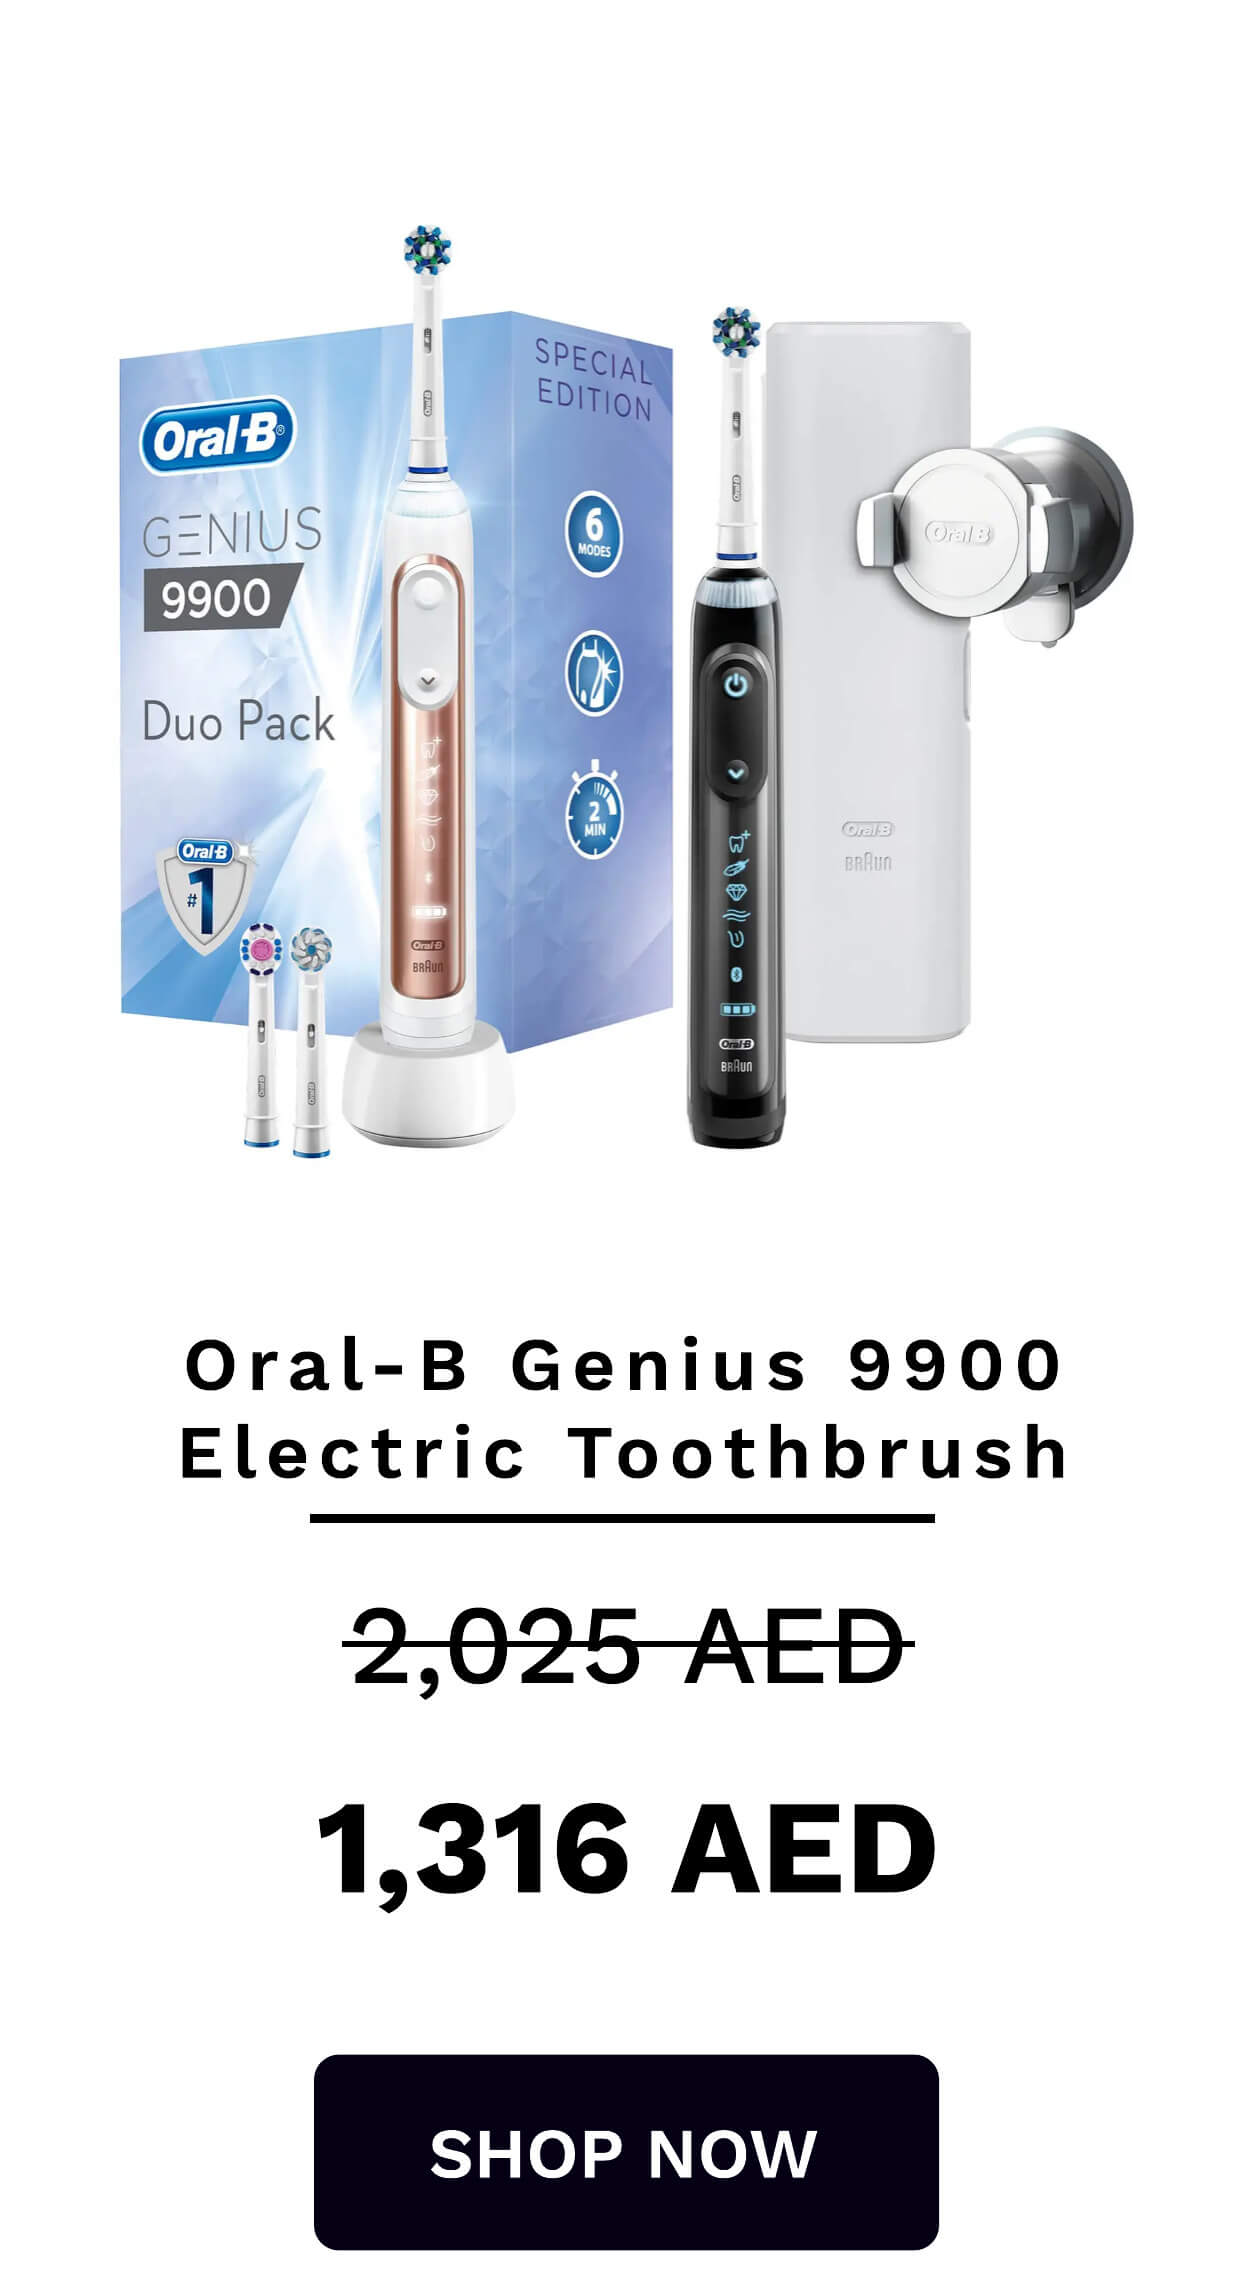 ralB 1 GNIUS A Duo Pack Oral-B Genius 9900 Electric Toothbrush 2,025-AED 1,316 AED SHOP NOW 